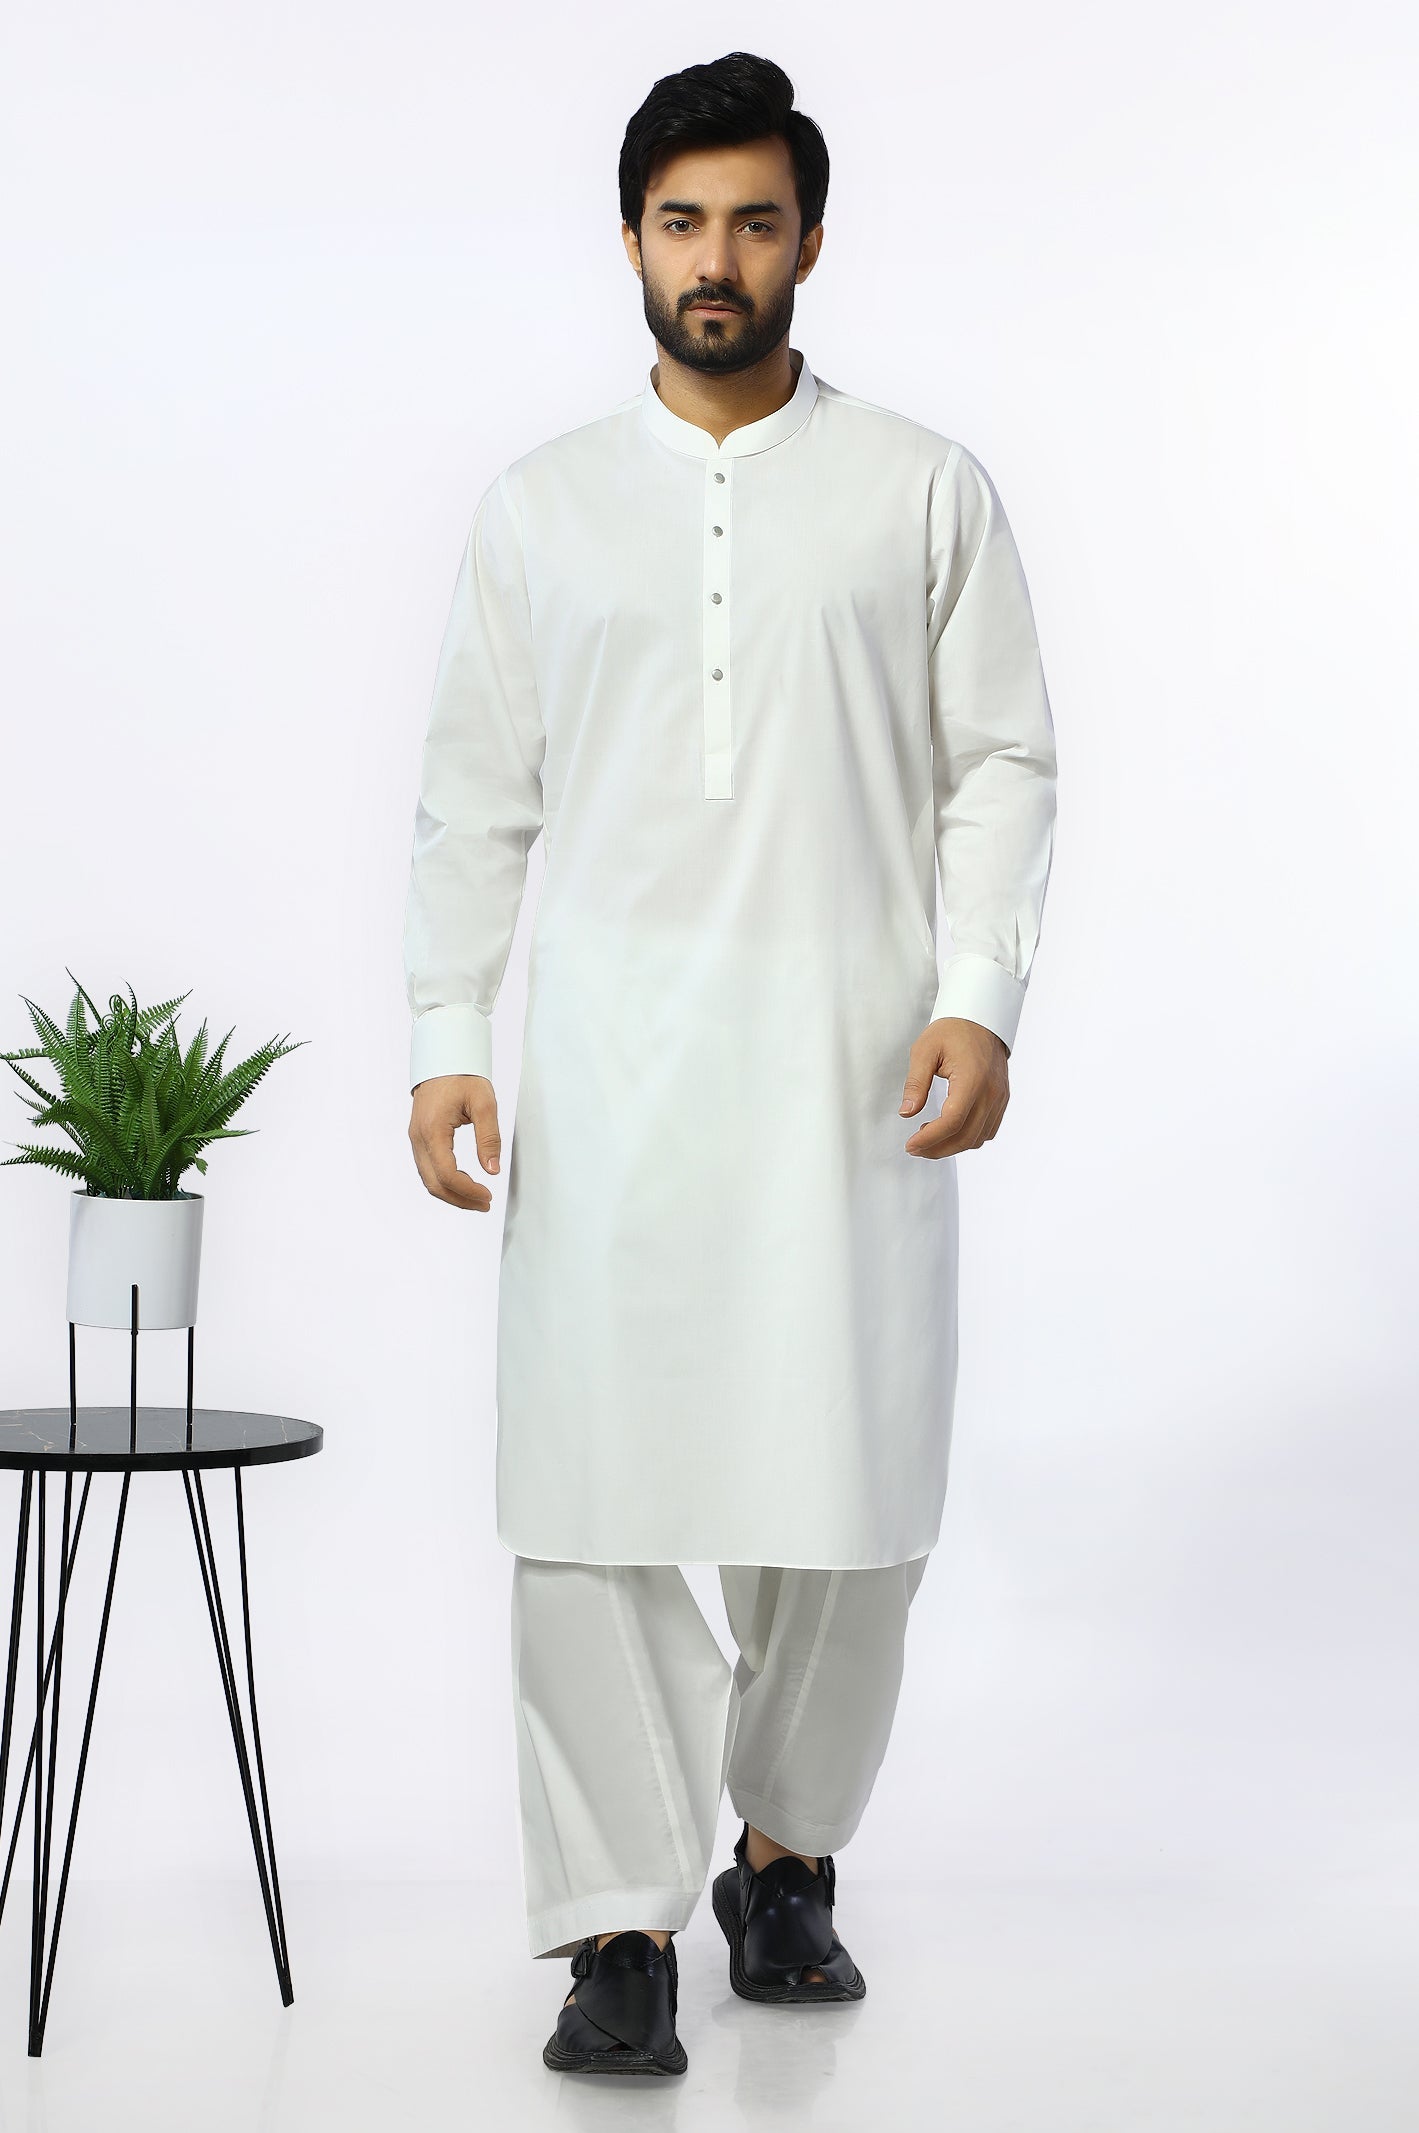 Off White Cotton Shalwar Kameez From Diners